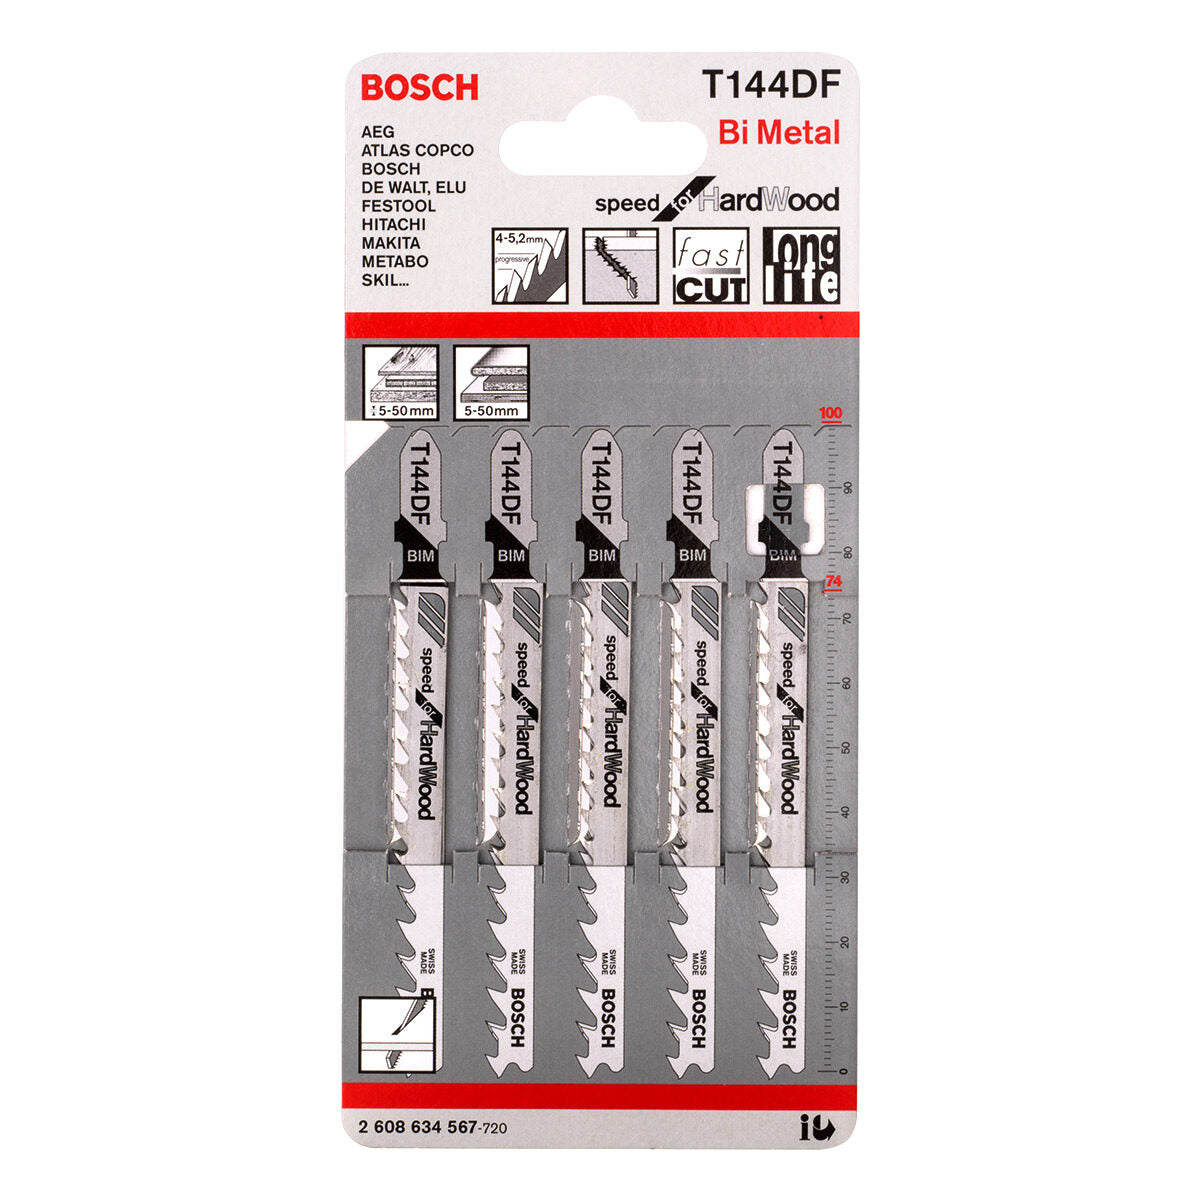 Bosch Jigsaw Blades T 144 DF Speed for Hard Wood 5 Pack 2608634567 Power Tool Services